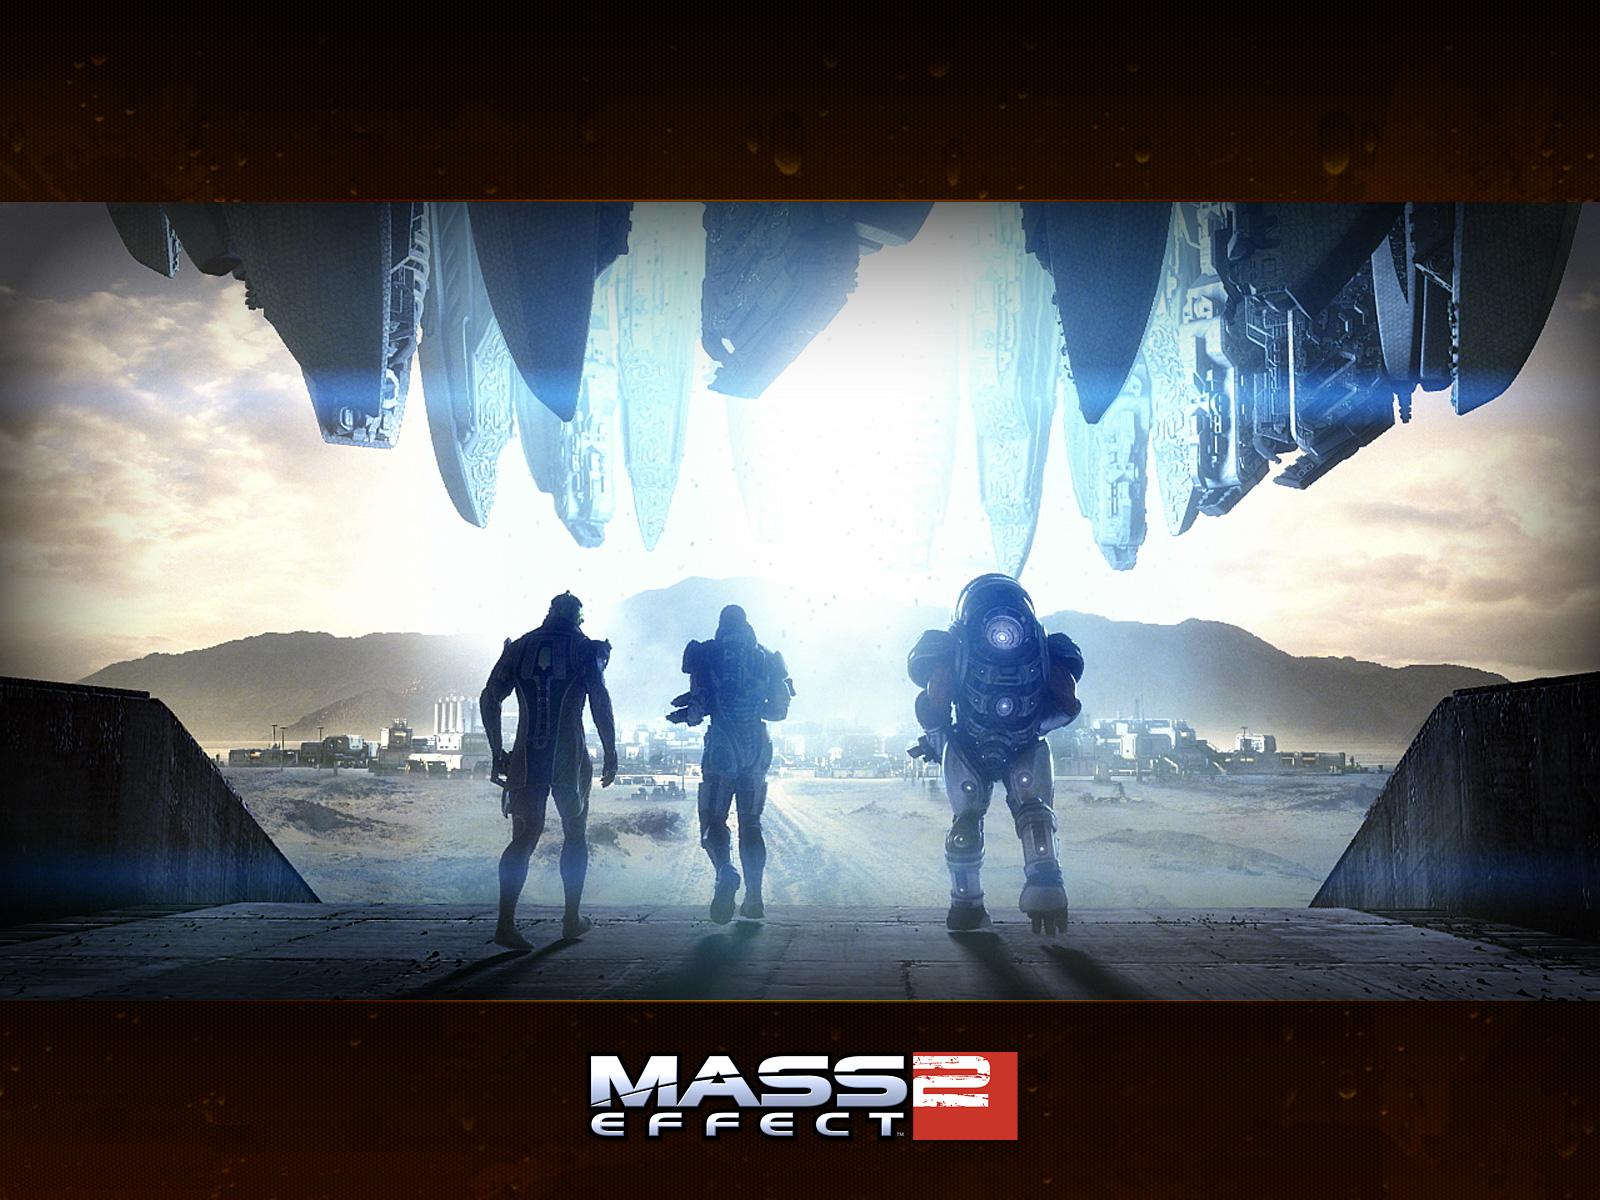 Mass Effect desktop wallpaper featuring vibrant graphics and game characters.